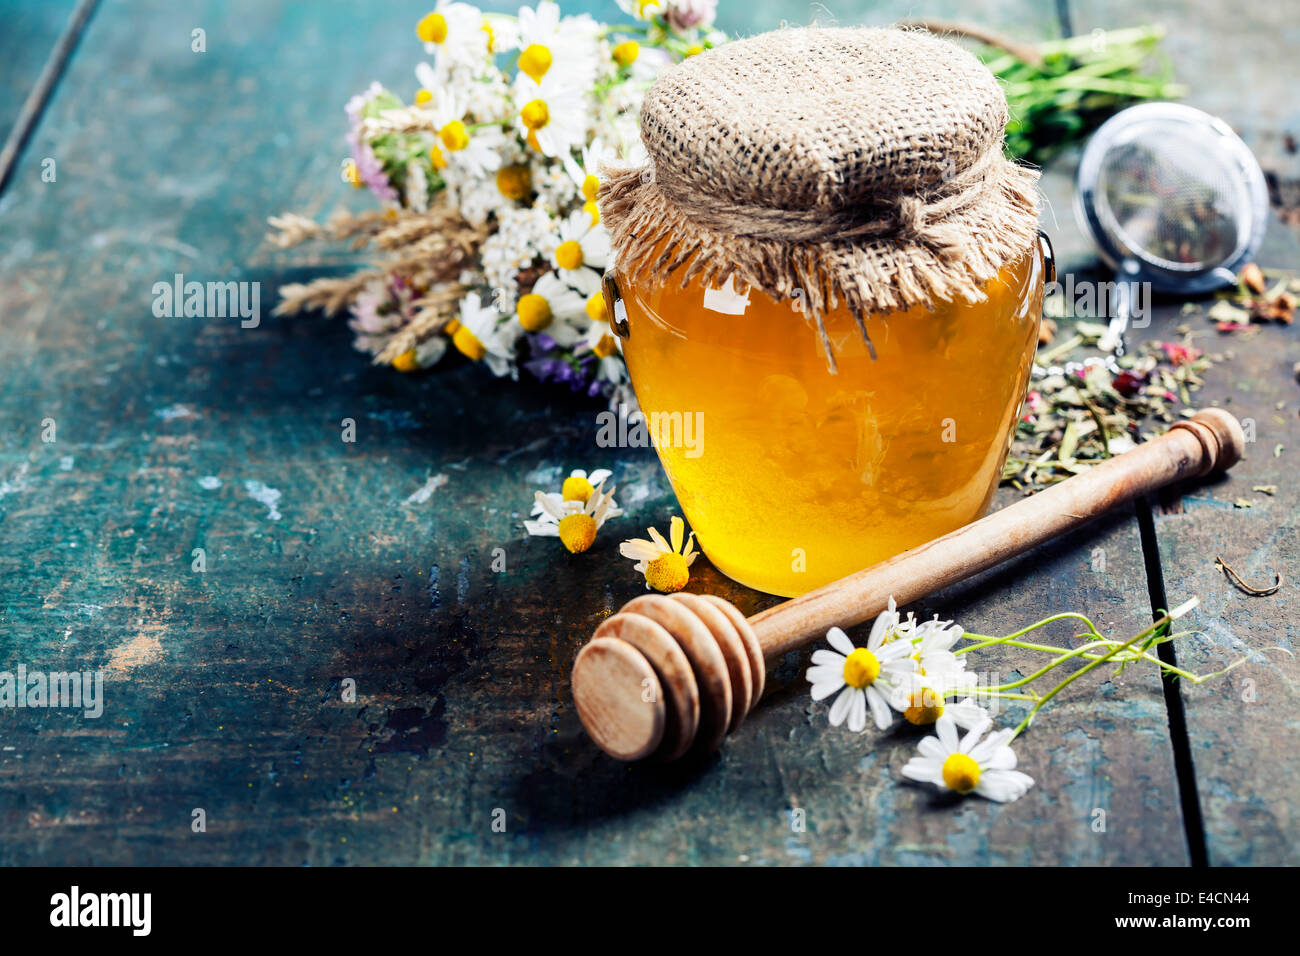 Honey_and_Herbal_tea_on_wooden_backgroun